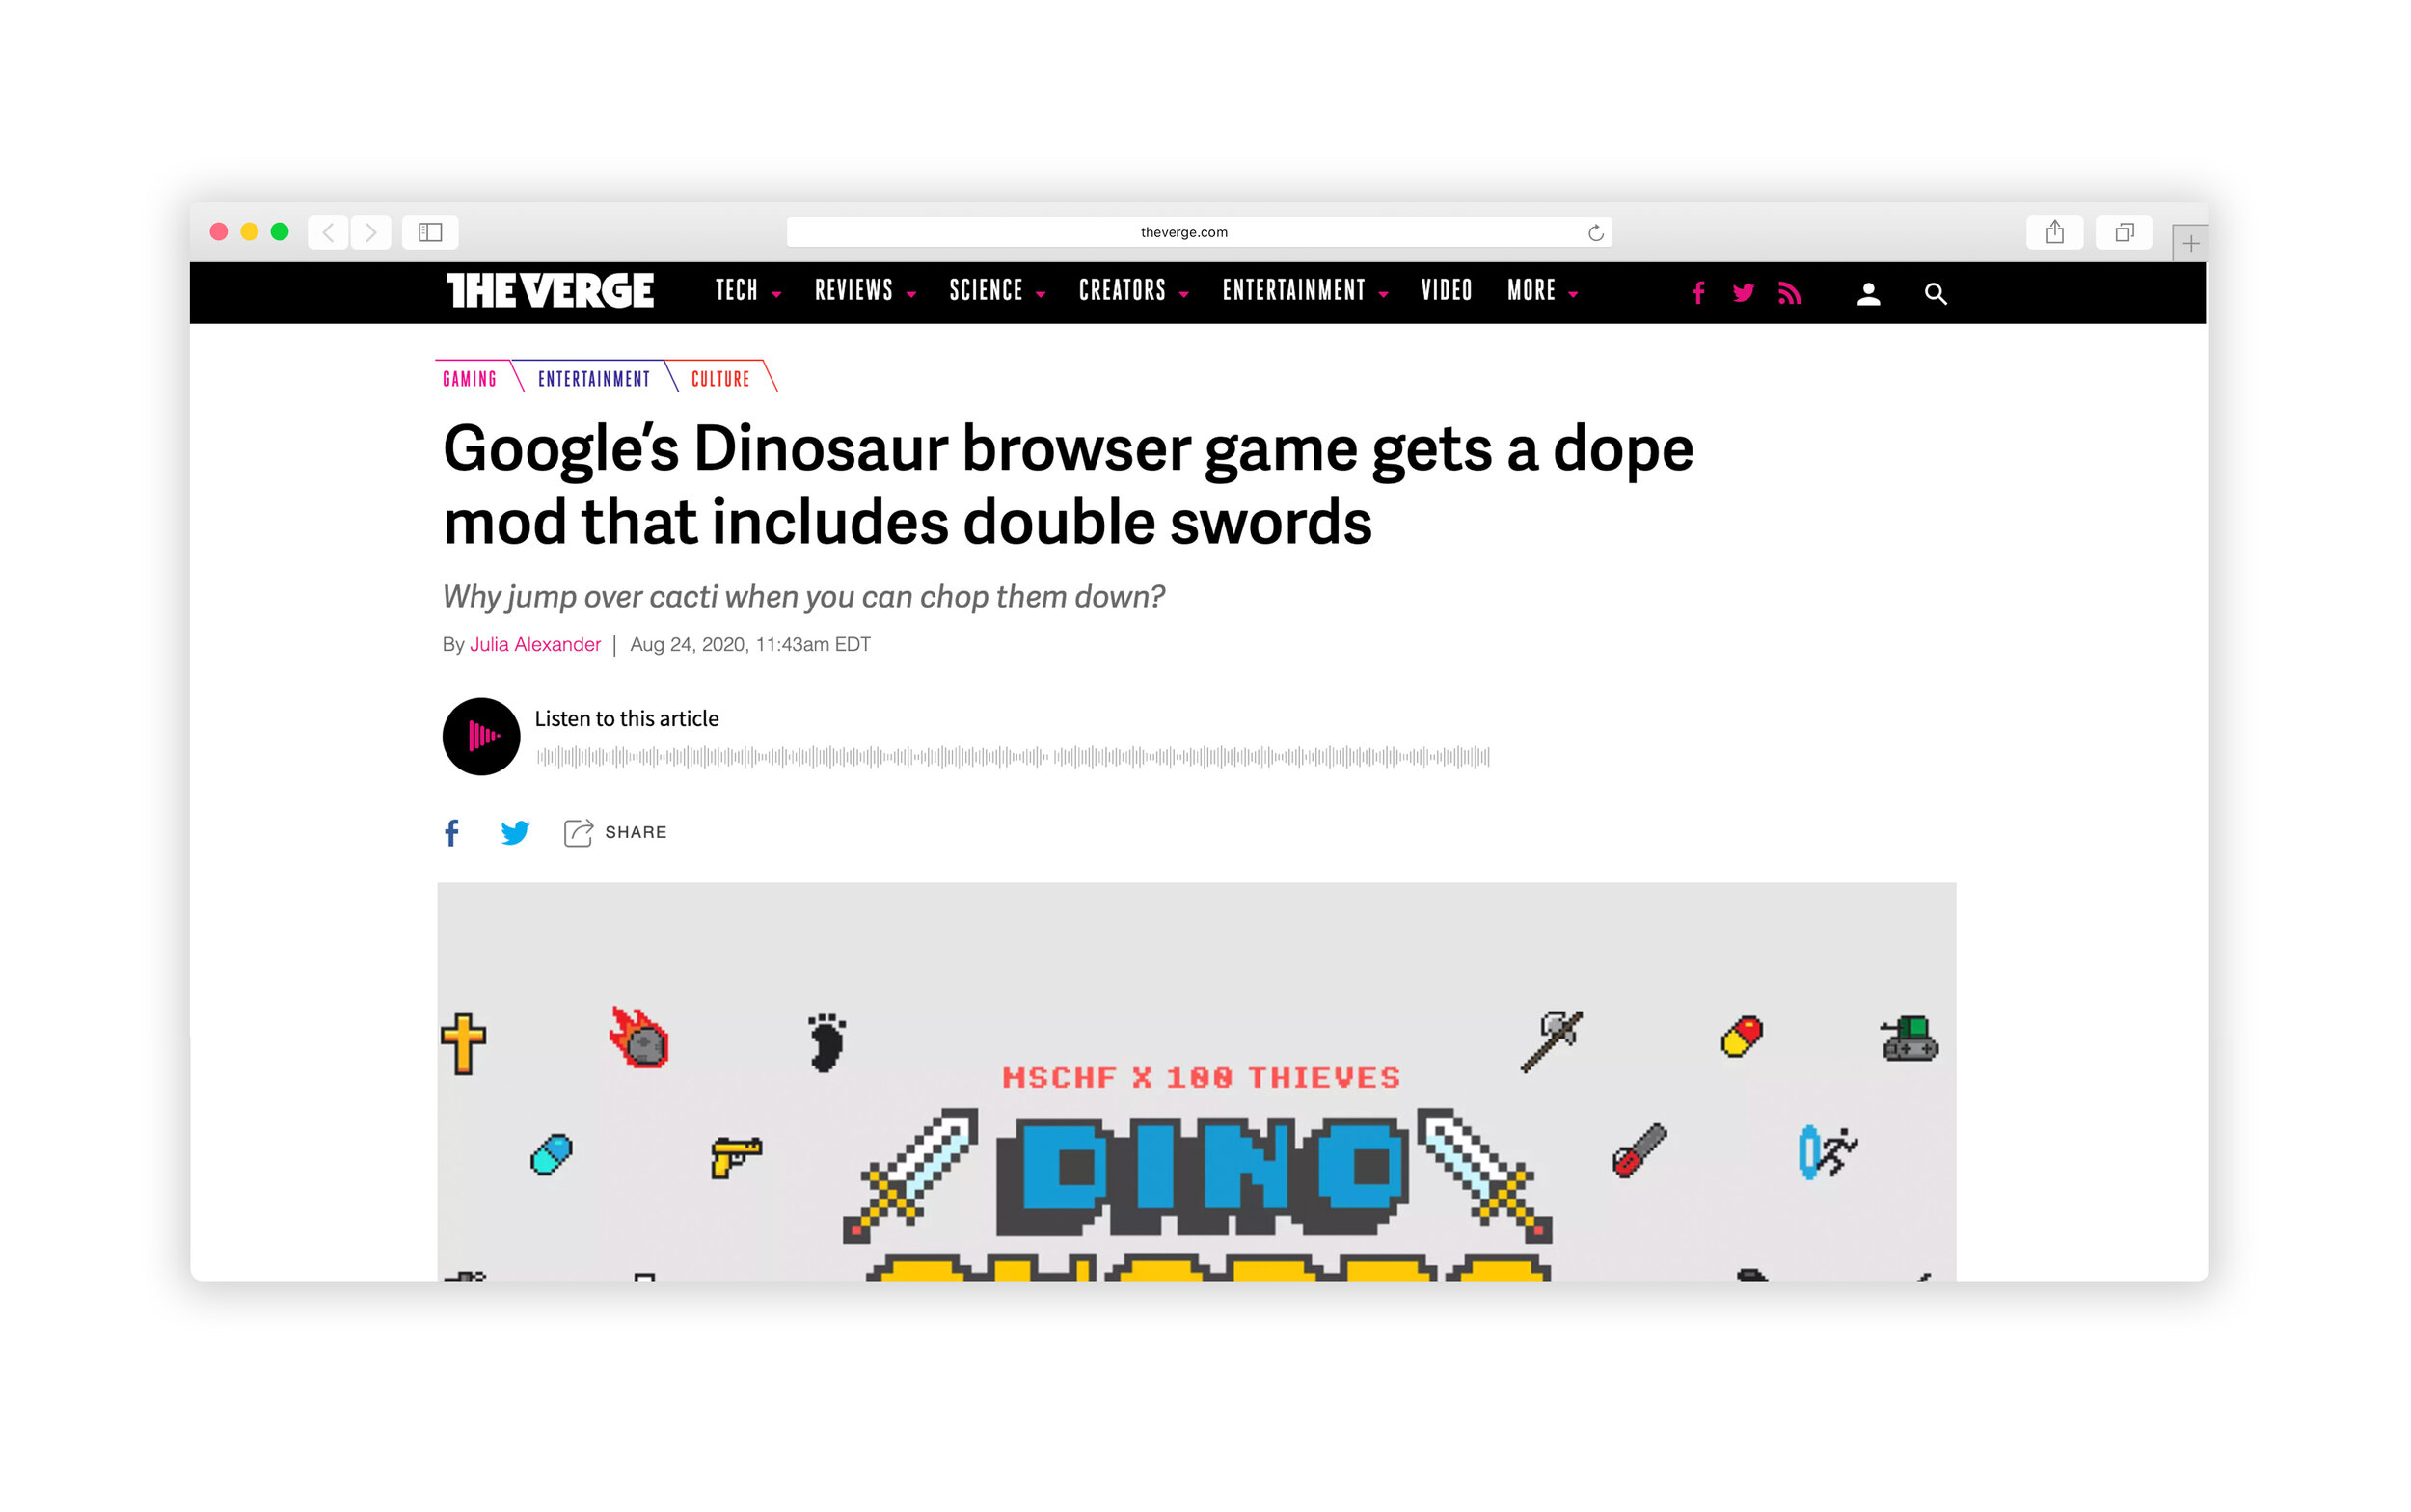 Google's Dinosaur browser game gets a dope mod that includes double swords  - The Verge